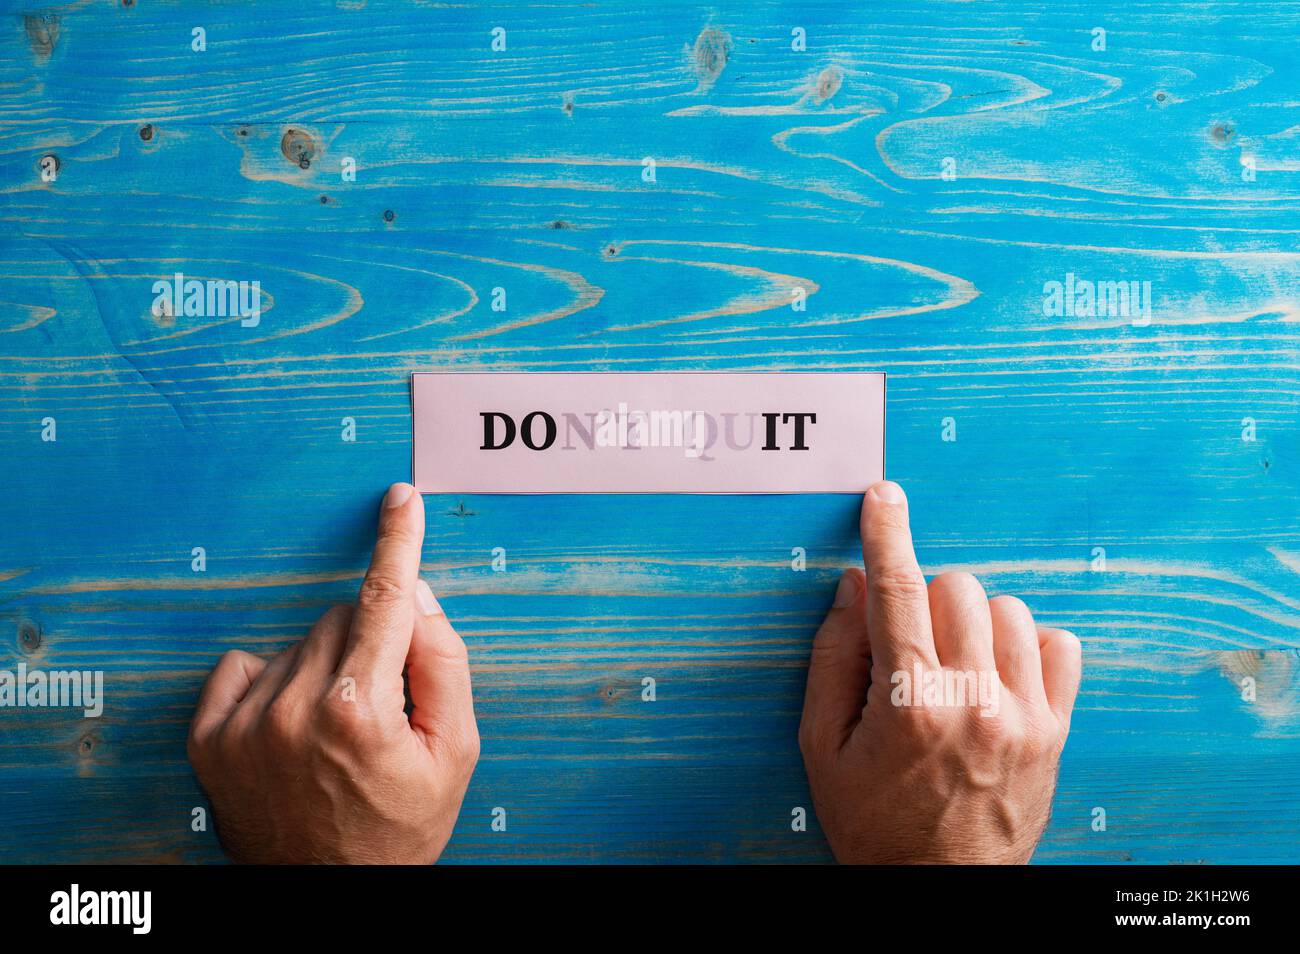 Male hands holding a paper with Dont quit sign fading into a Do it sign written on it, placing it on textured blue background. Stock Photo